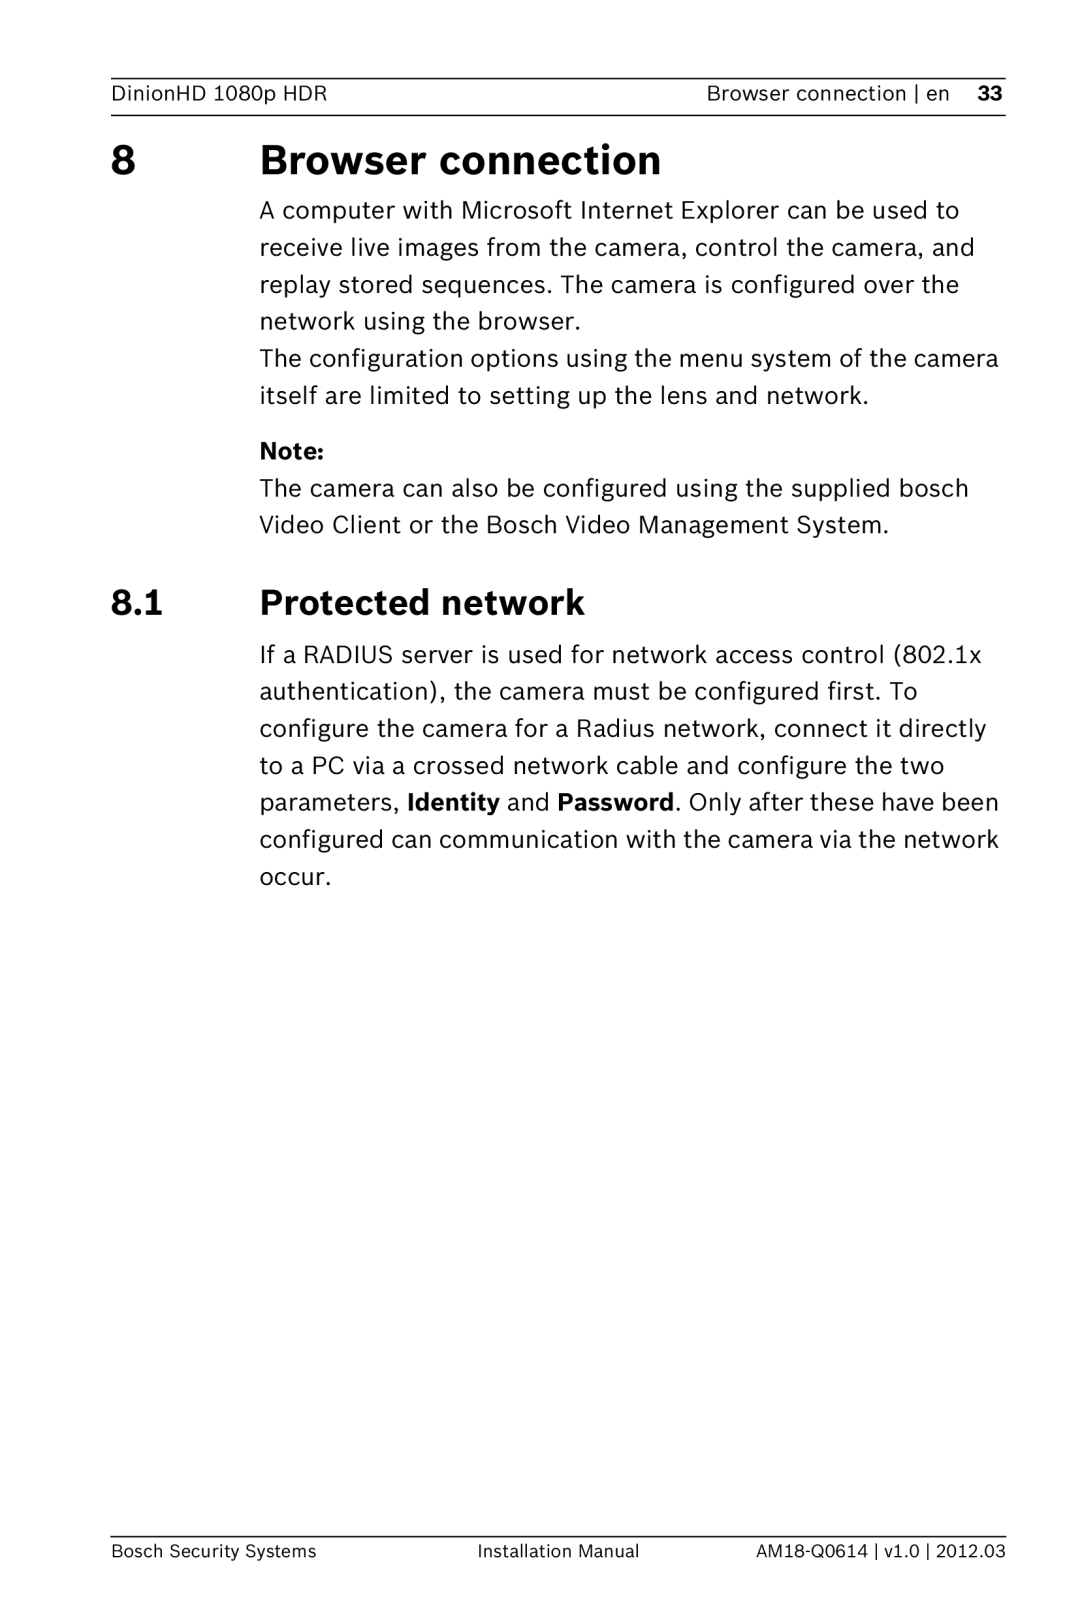 Bosch Appliances nbn-932 installation manual 8Browser connection, 8.1Protected network 